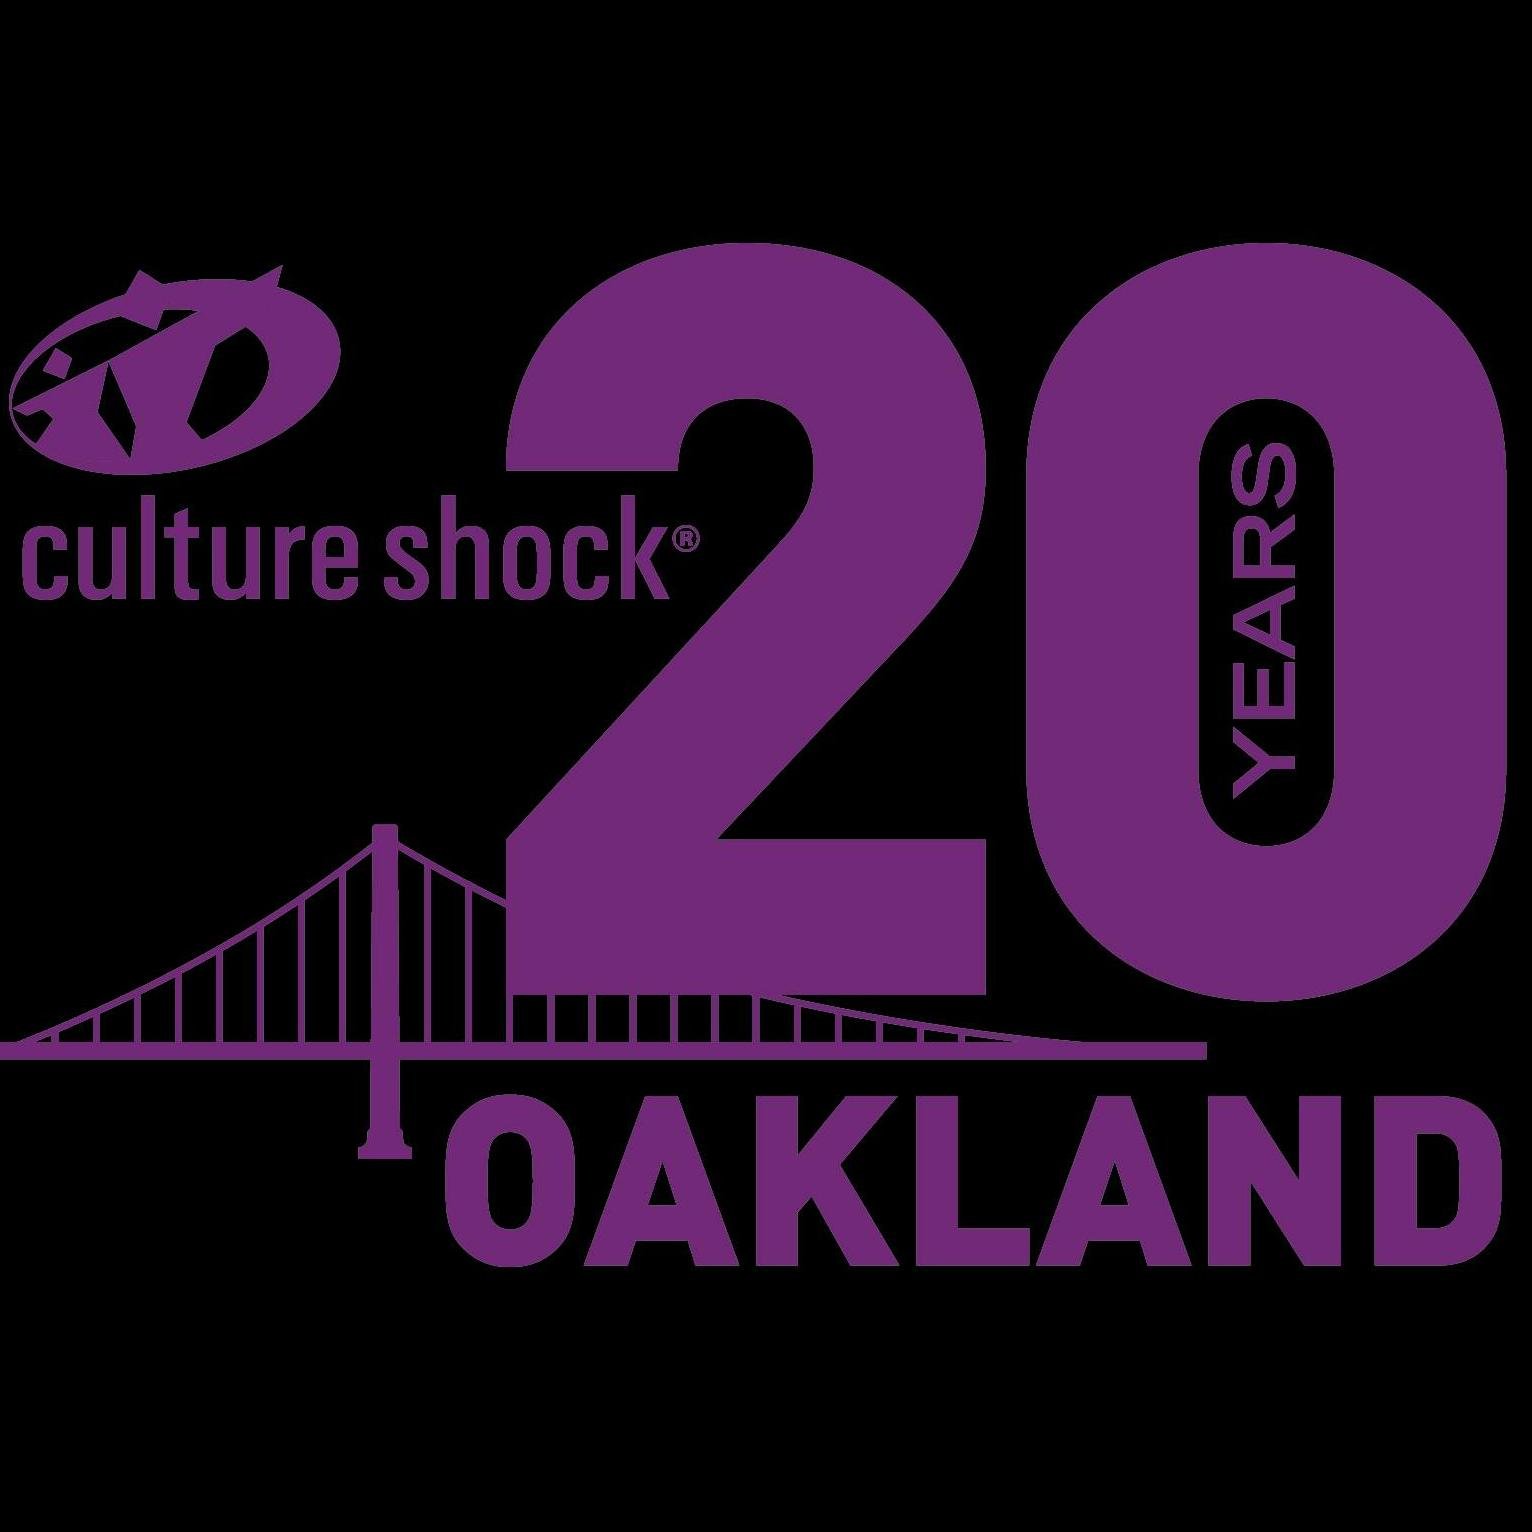 Culture Shock is a hip-hop dance organization dedicated to innovative performance, artist development, and community enrichment.